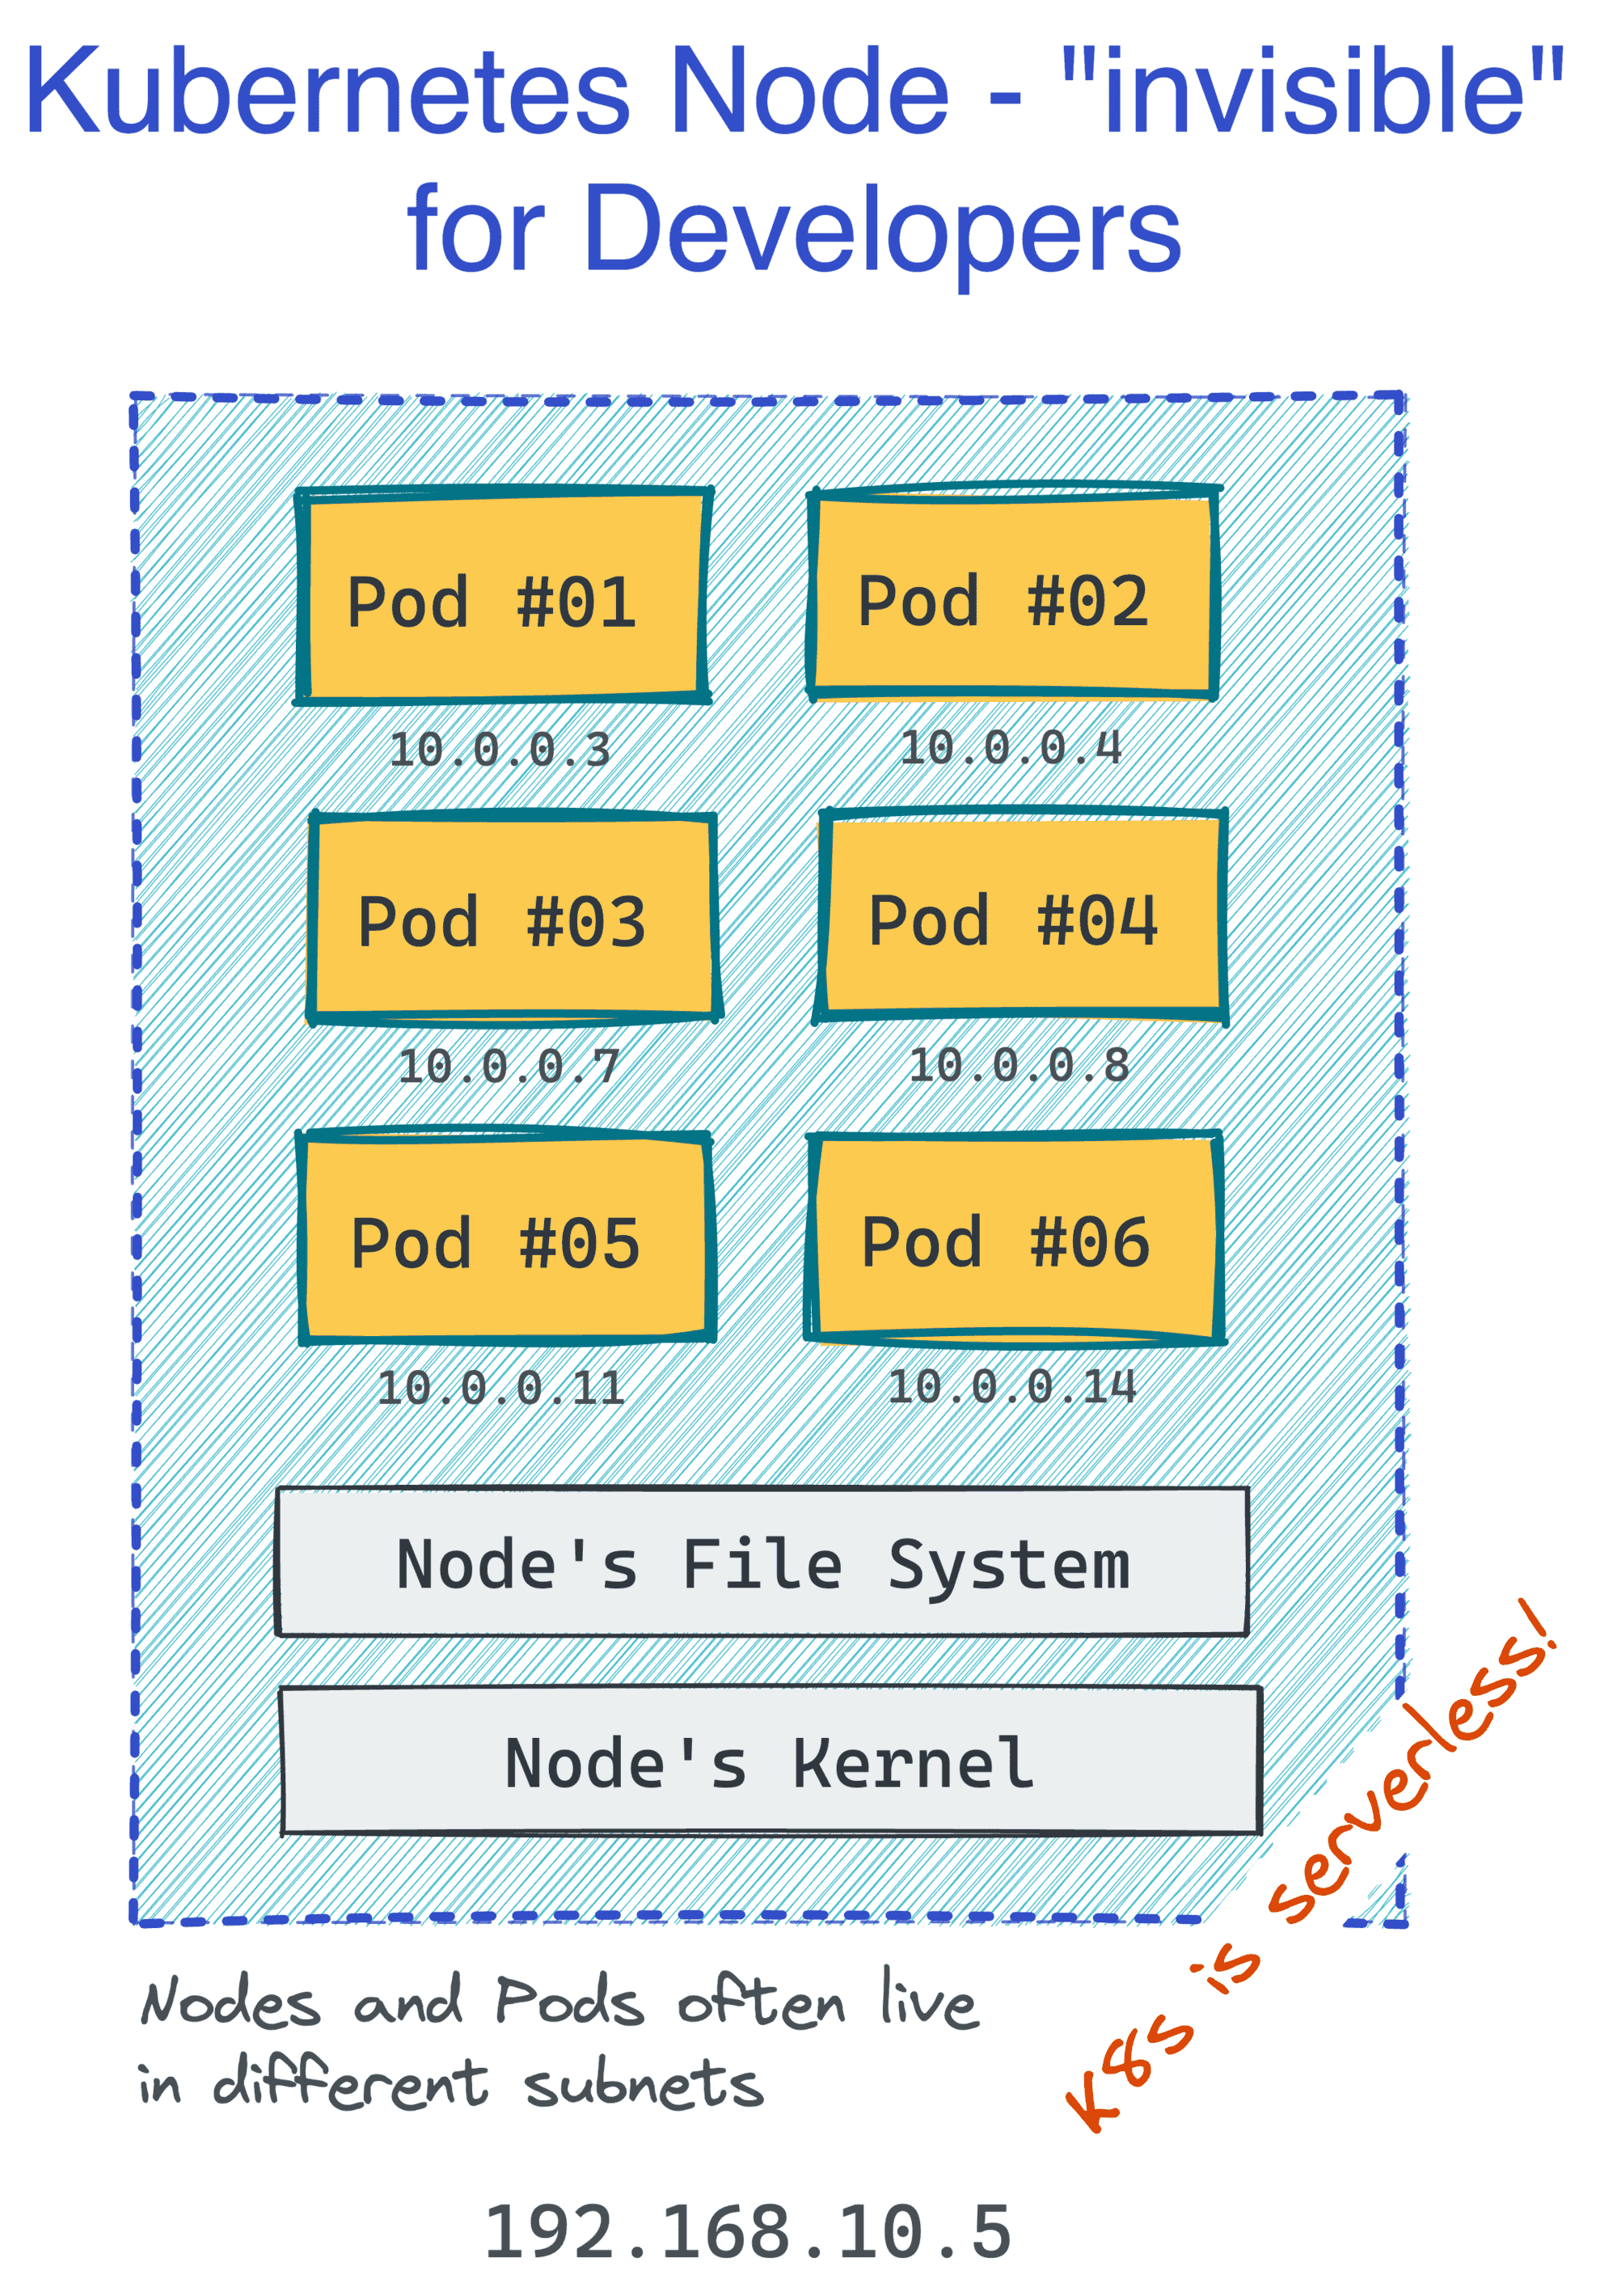 Kubernetes Node - a server constituting the cluster.